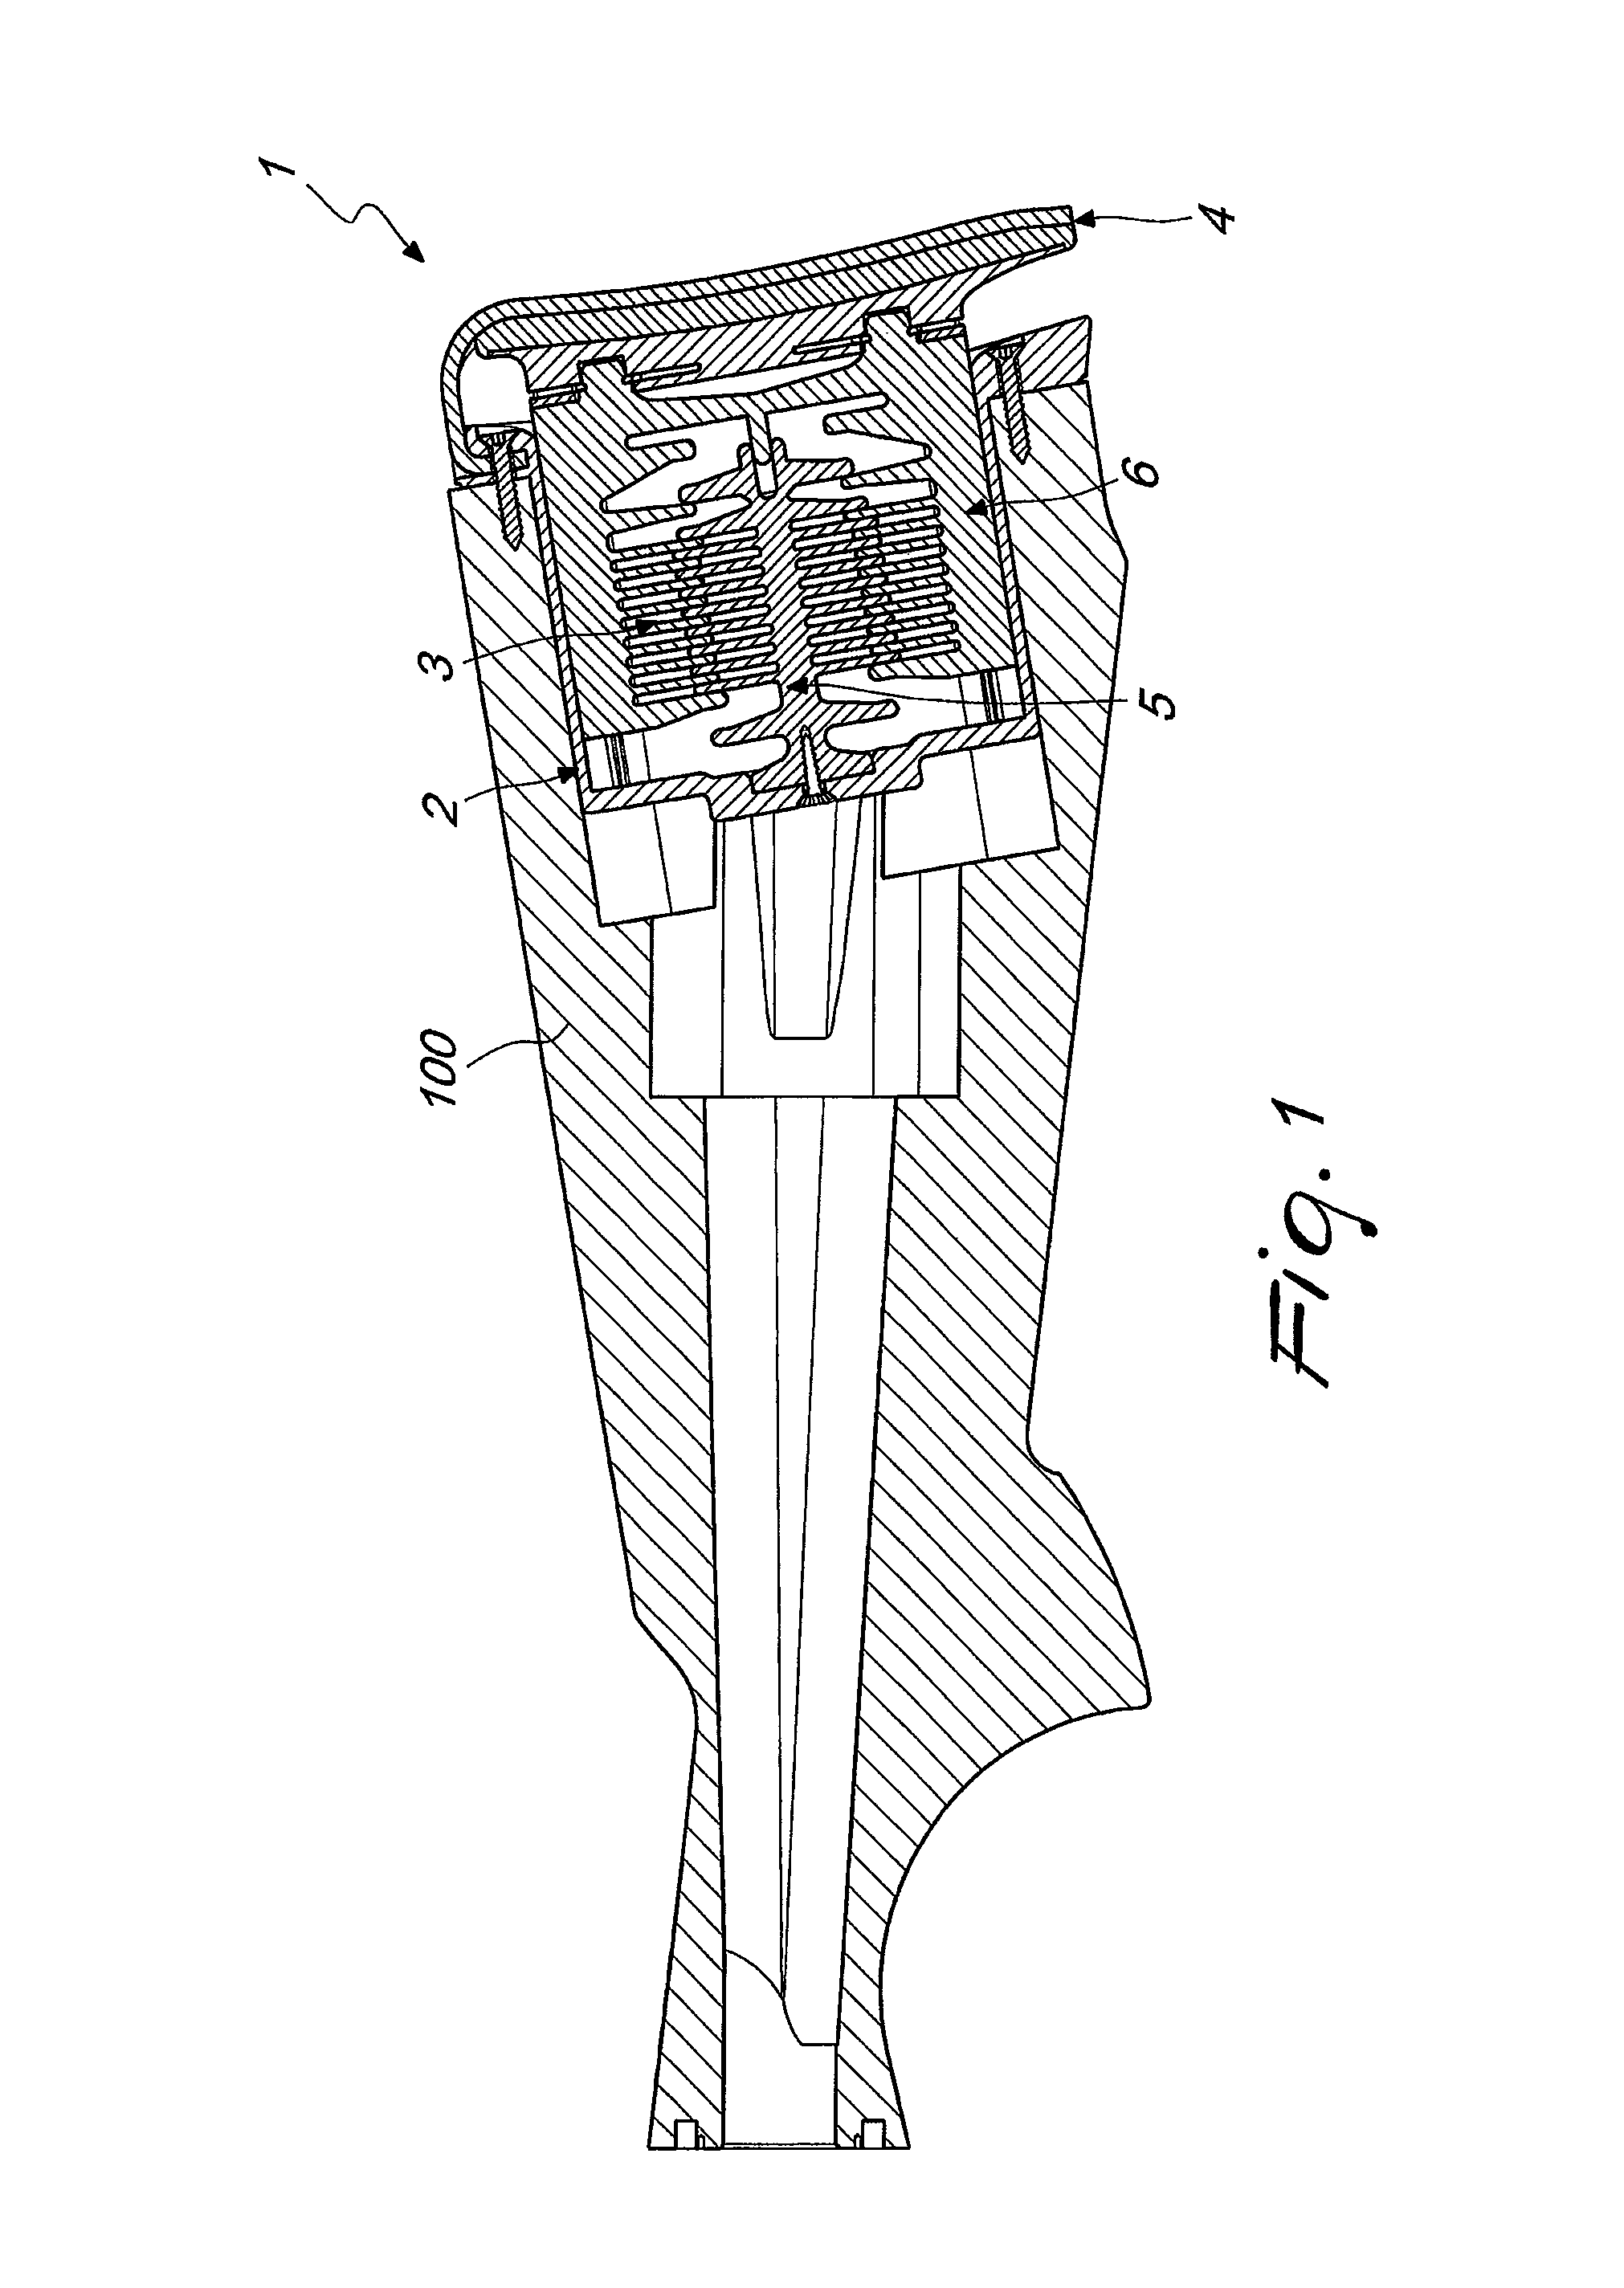 Recoil damping device for portable firearms